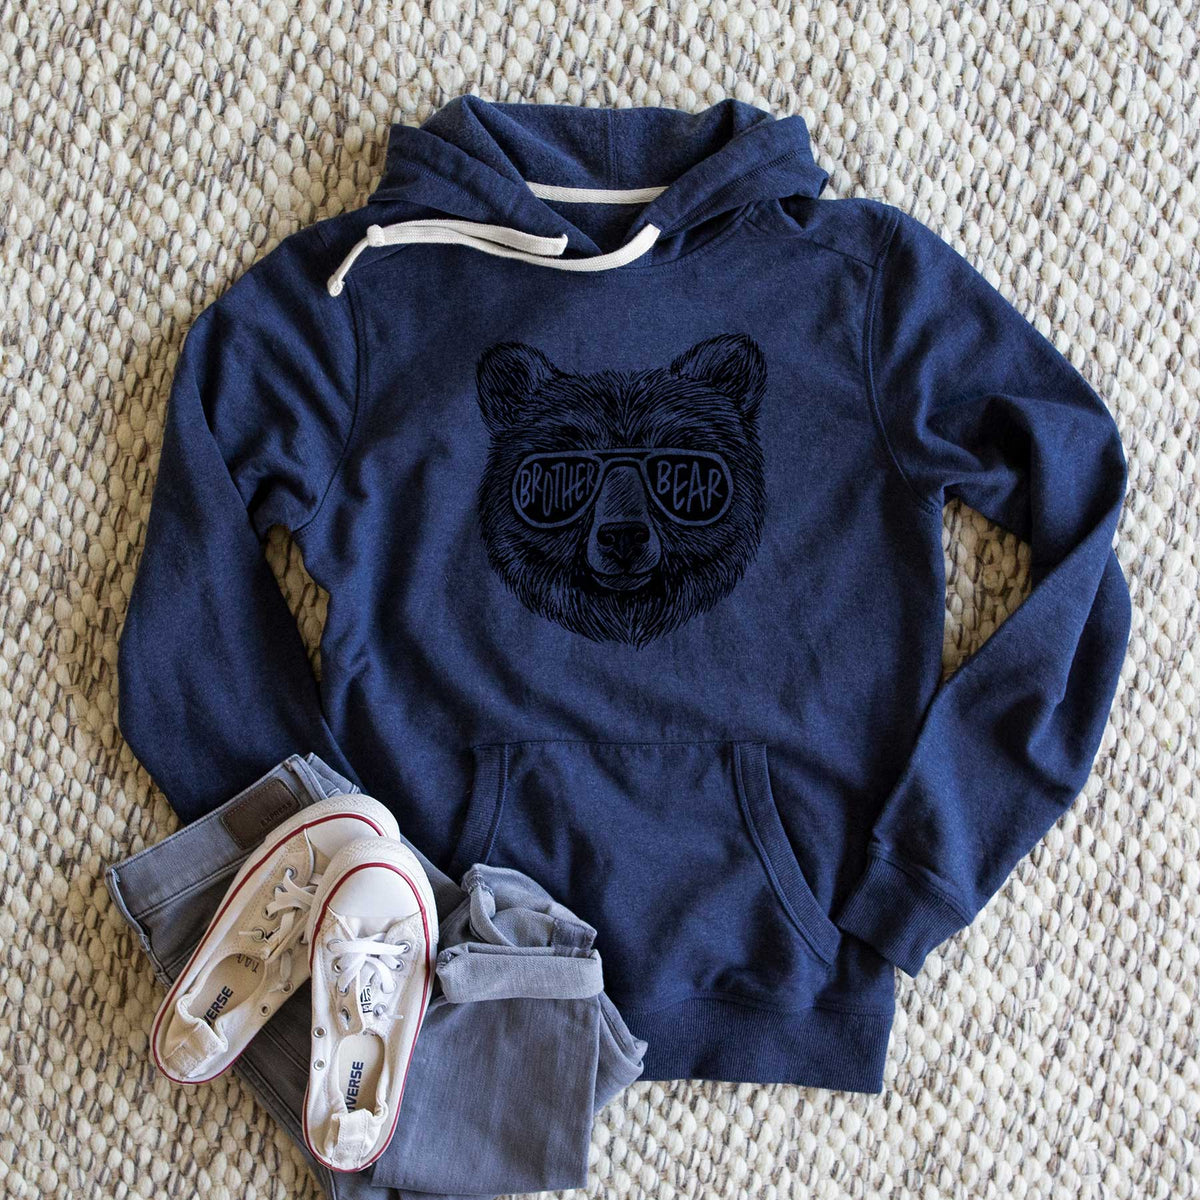 Brother Bear - Unisex Recycled Hoodie - CLOSEOUT - FINAL SALE